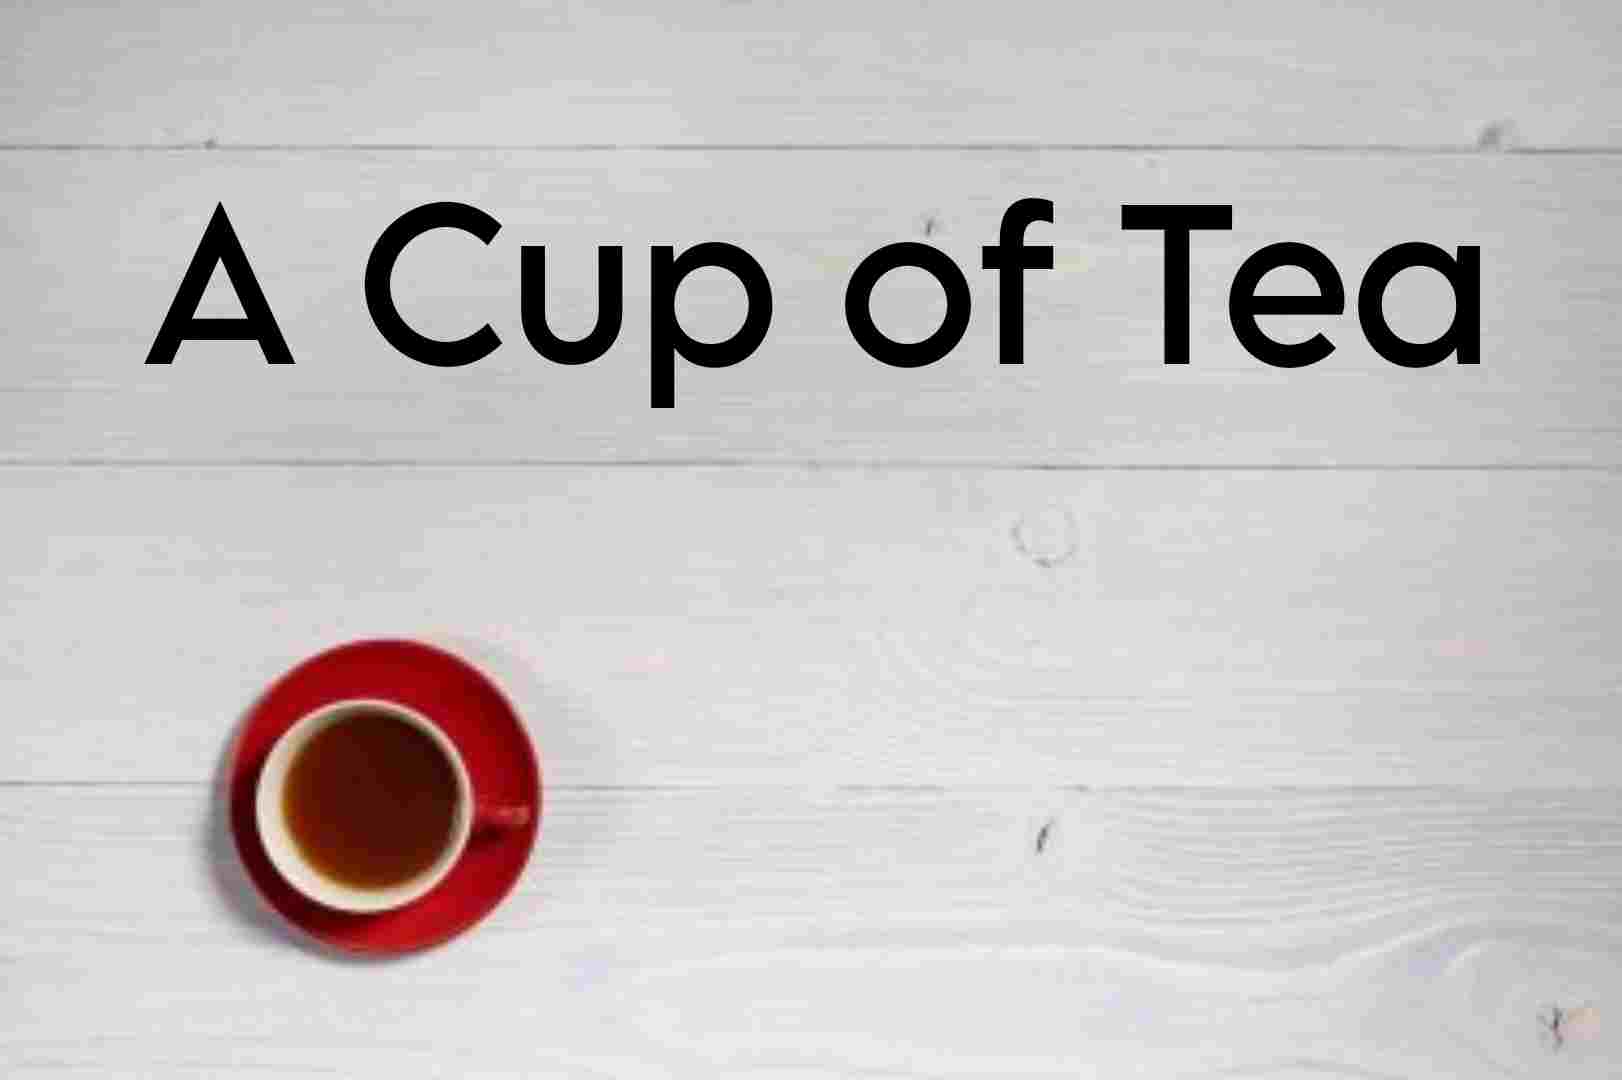 AHSEC Class 12 Alternative English Chapter 1 A Cup of Tea Question Answers